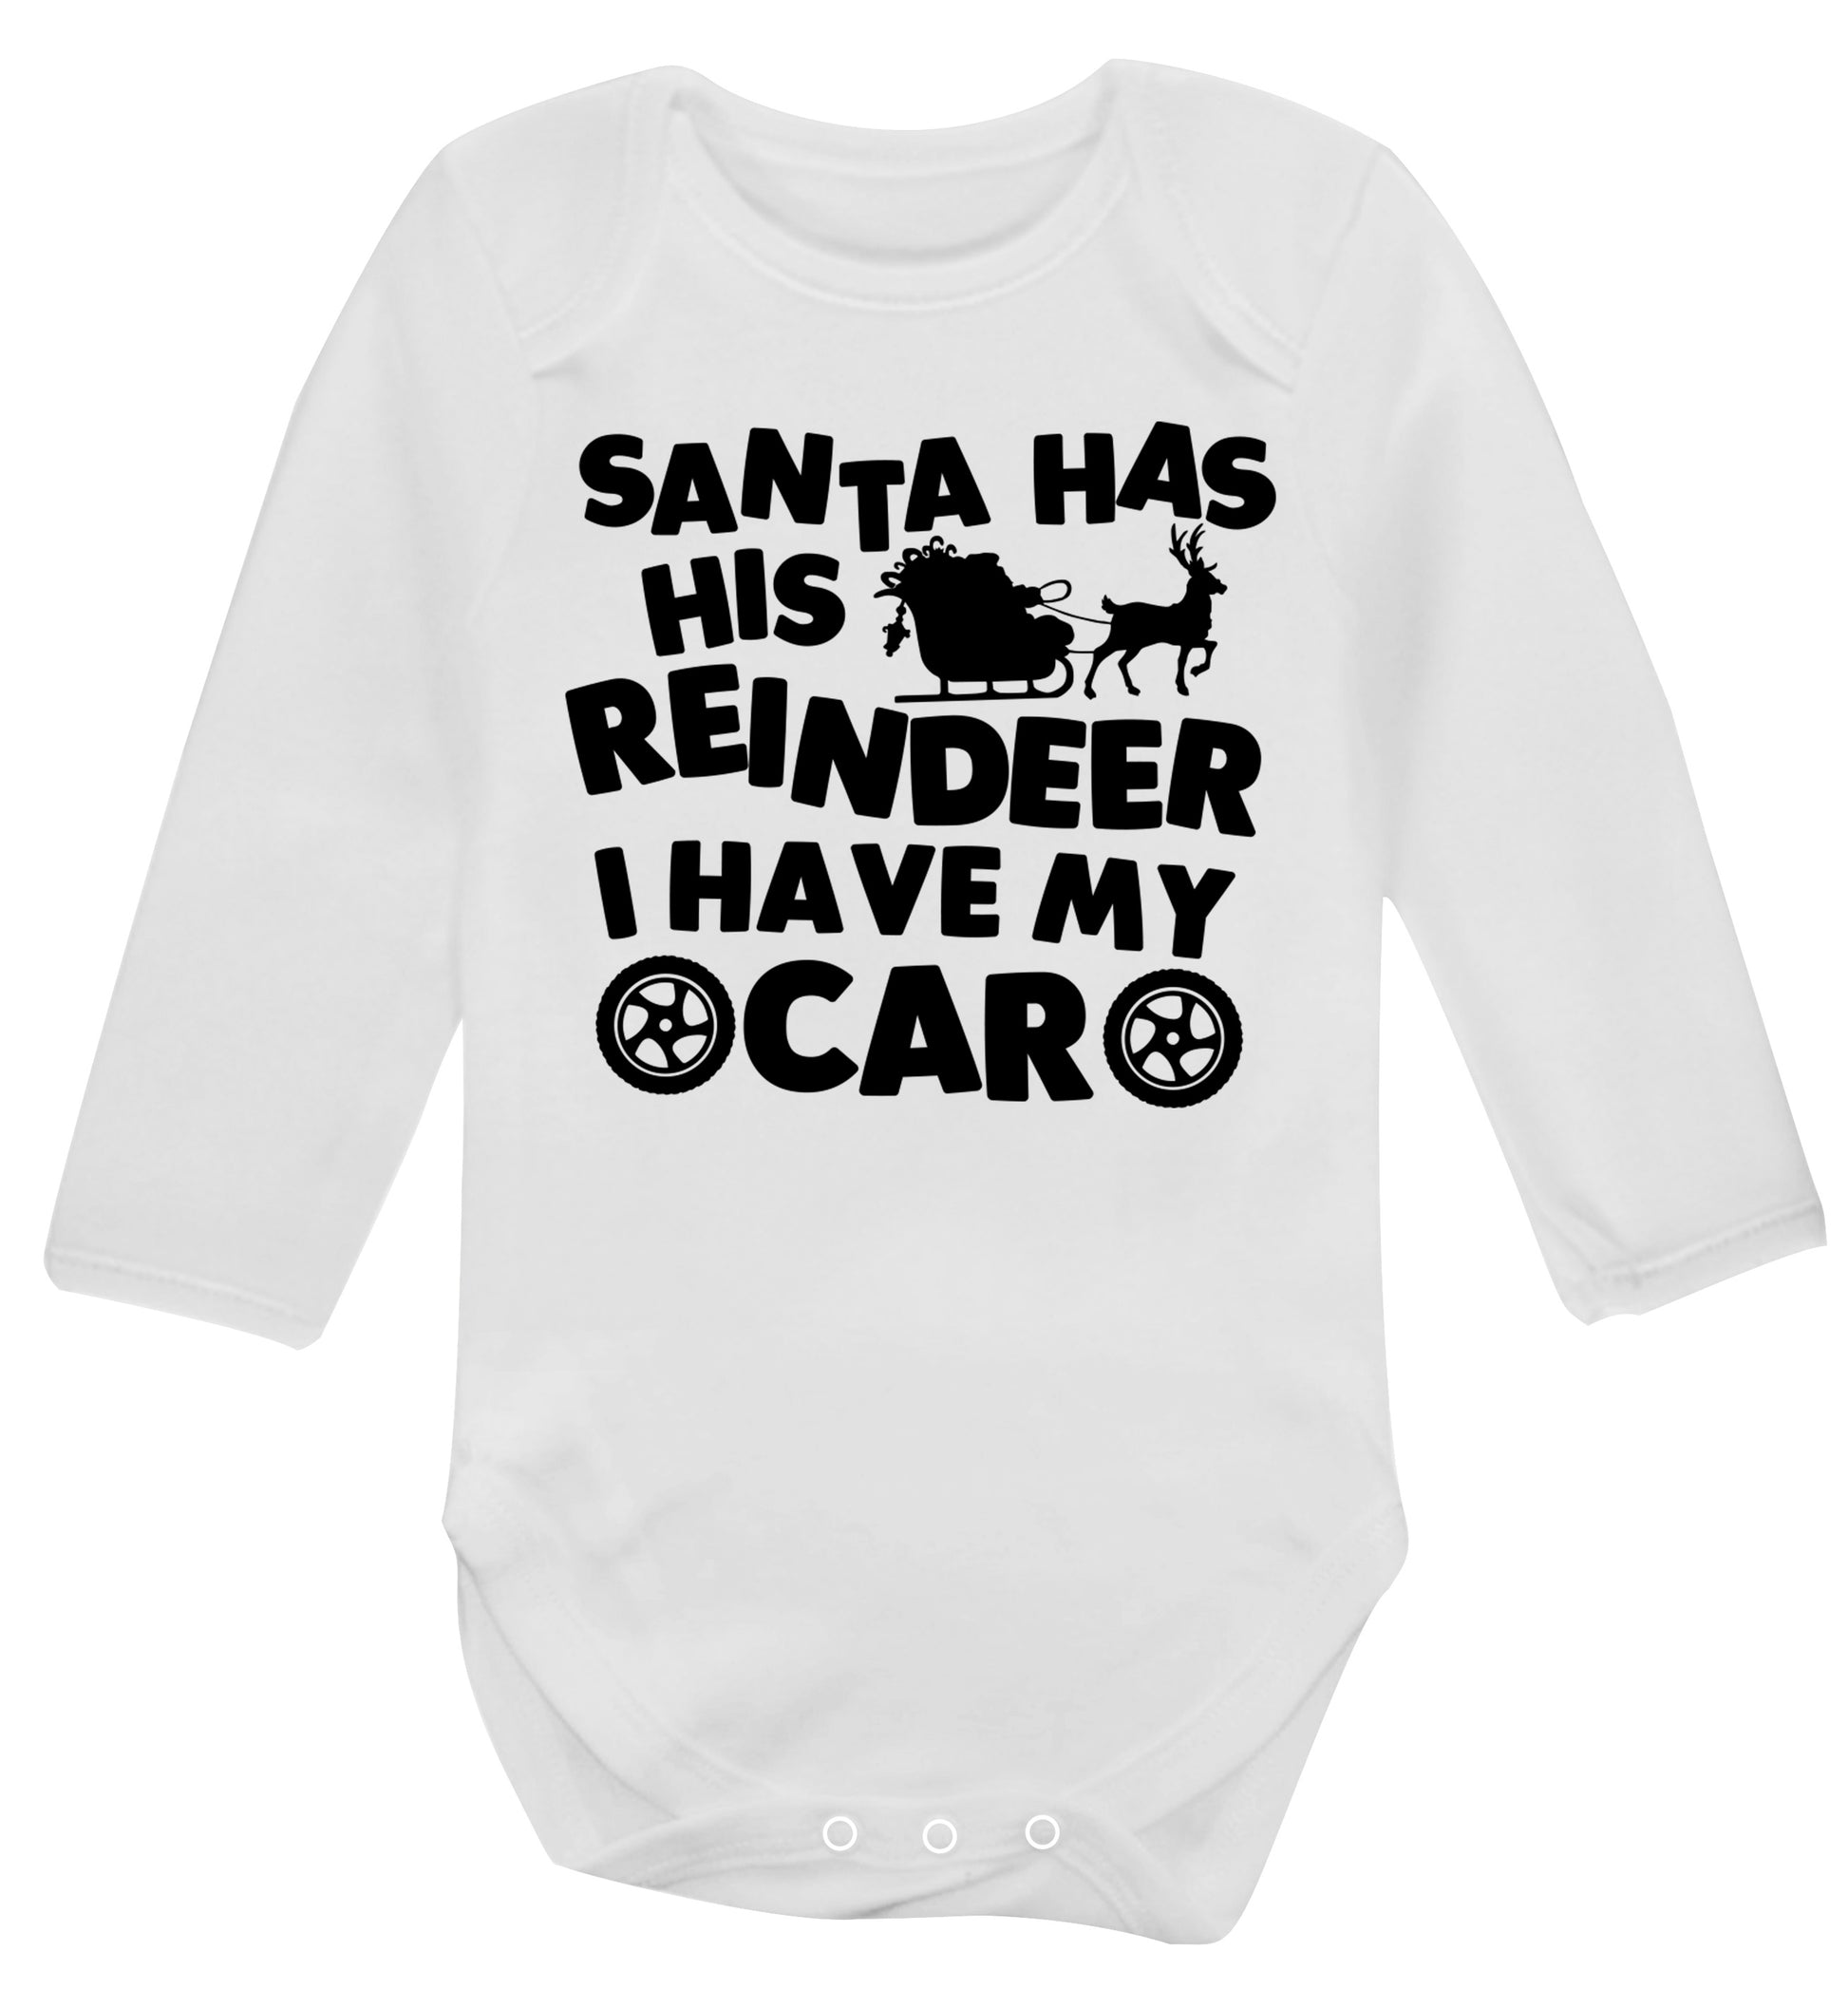 Santa has his reindeer I have my car Baby Vest long sleeved white 6-12 months